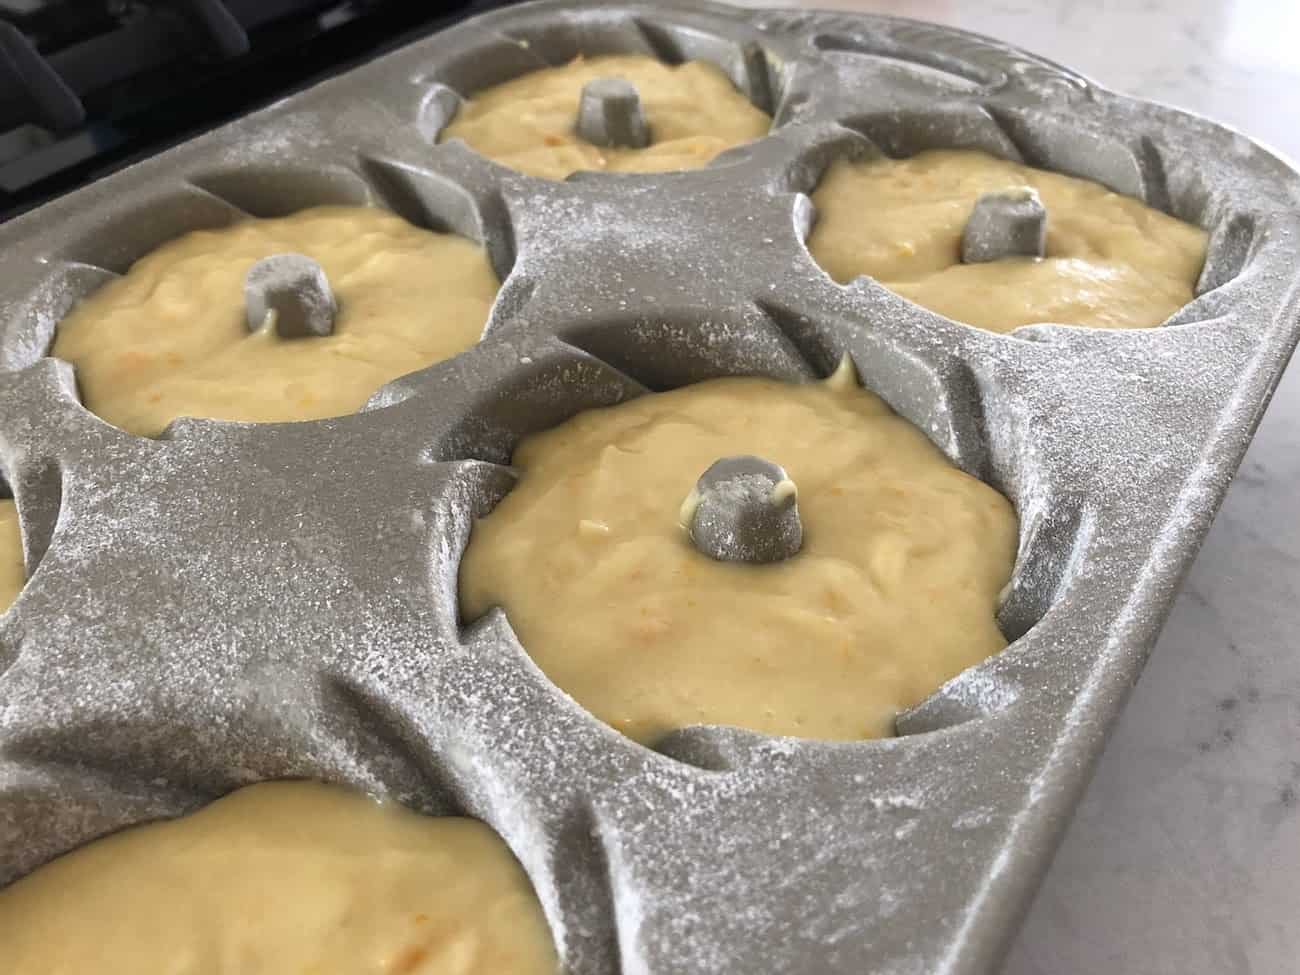 Orange Bundtlette Cakes in molds before going into the oven